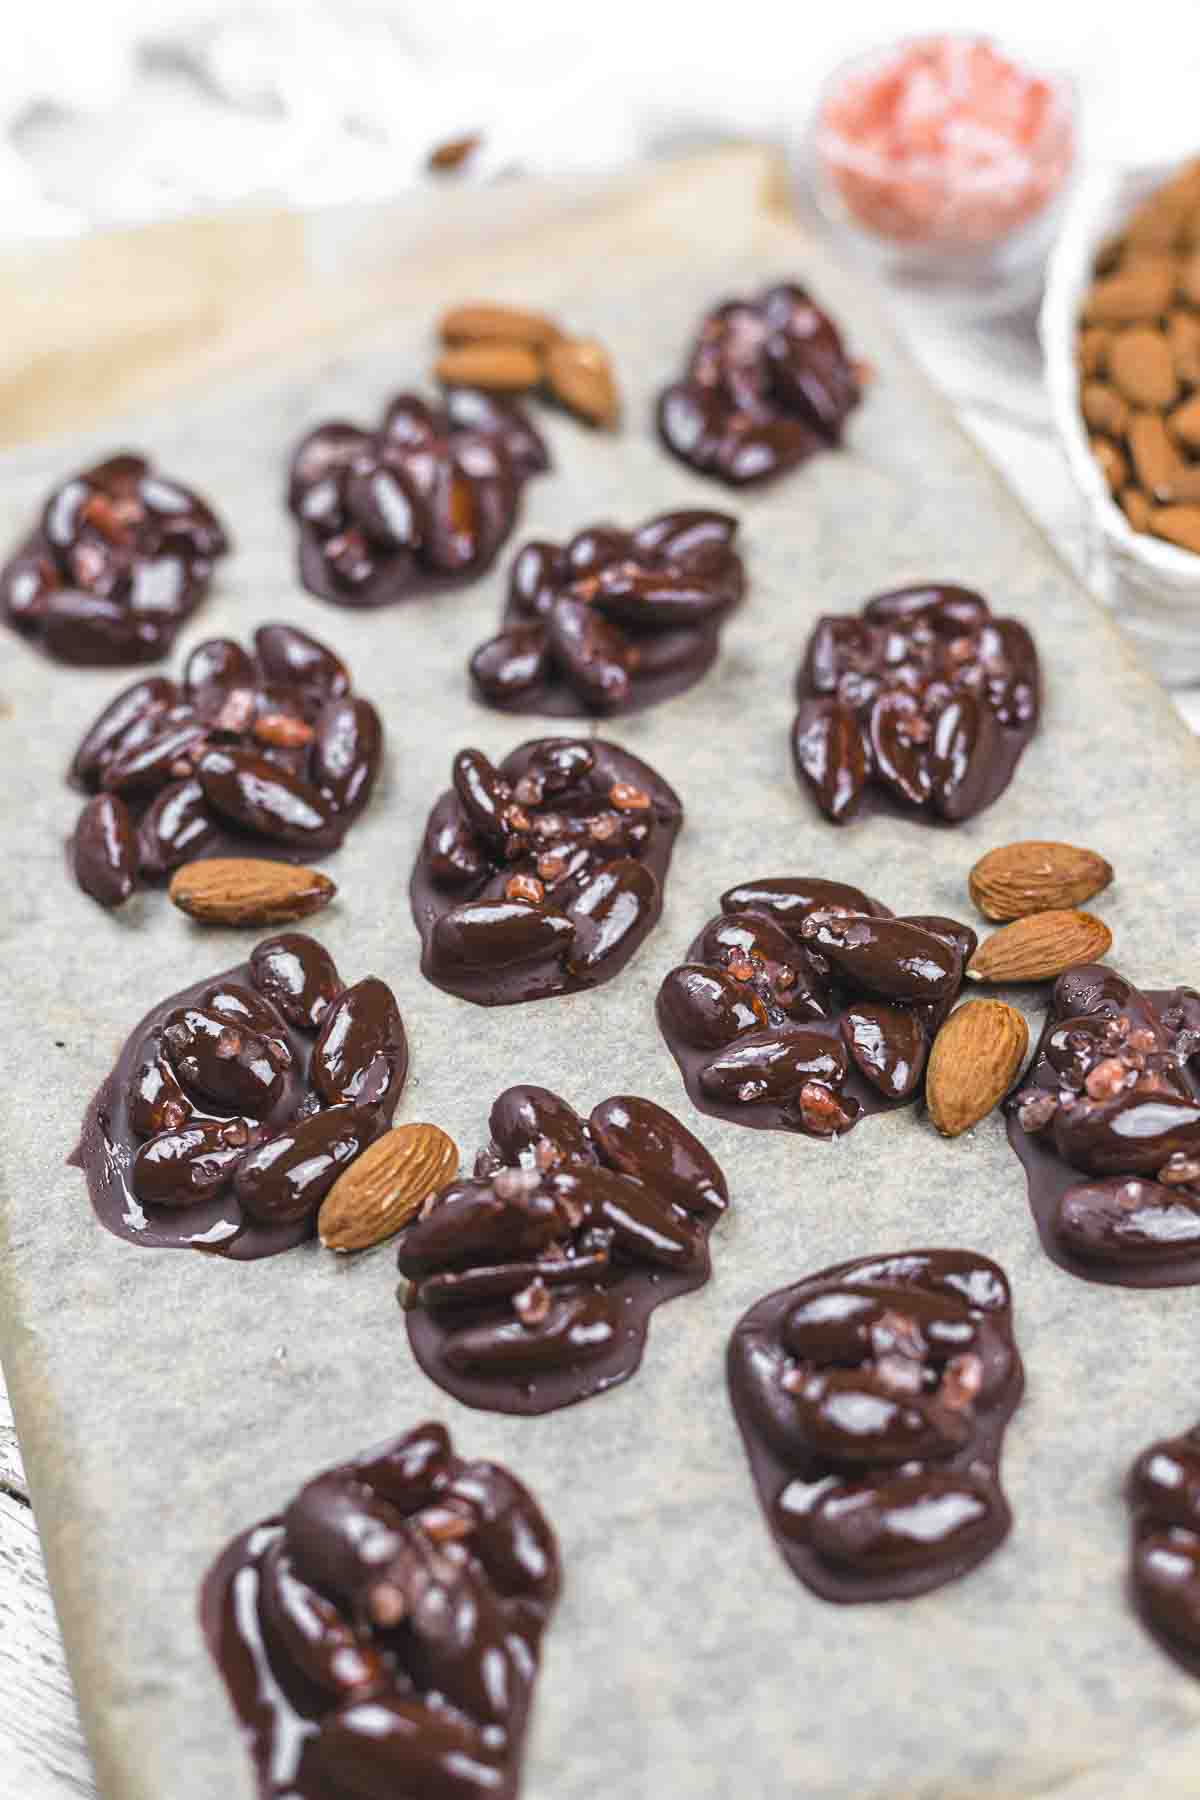 Chocolate covered almonds on a baking sheet.